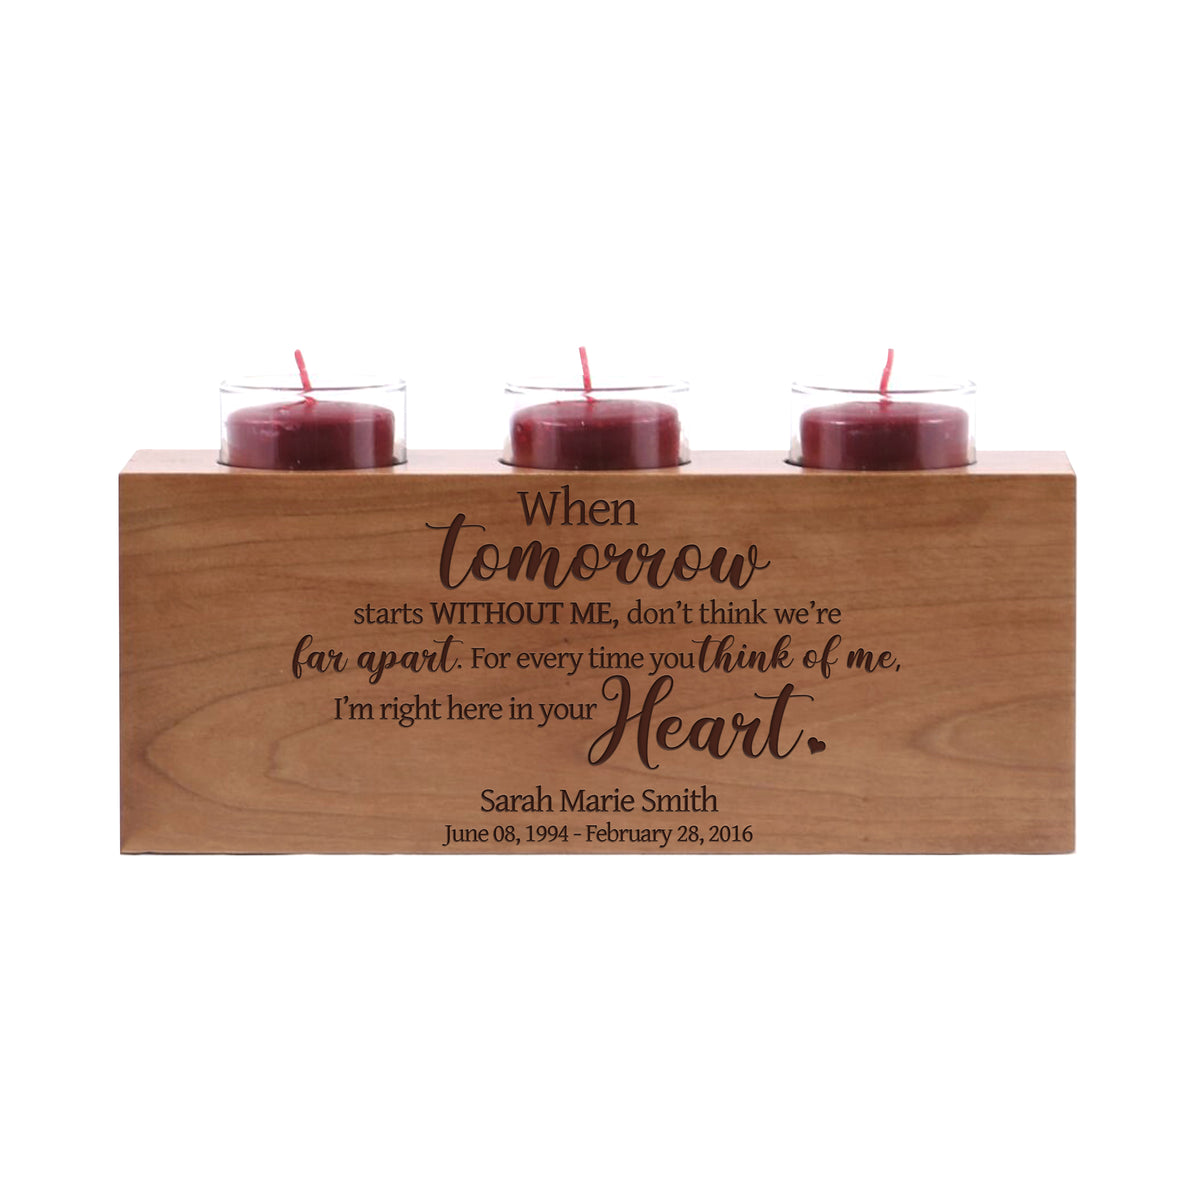 LifeSong Milestones Personalized Memorial Sympathy 3 Votive Candle Holder - When Tomorrow Starts Engraved Tea Light Candle Loss of Loved One Gift - 10” x 4” x 4”.